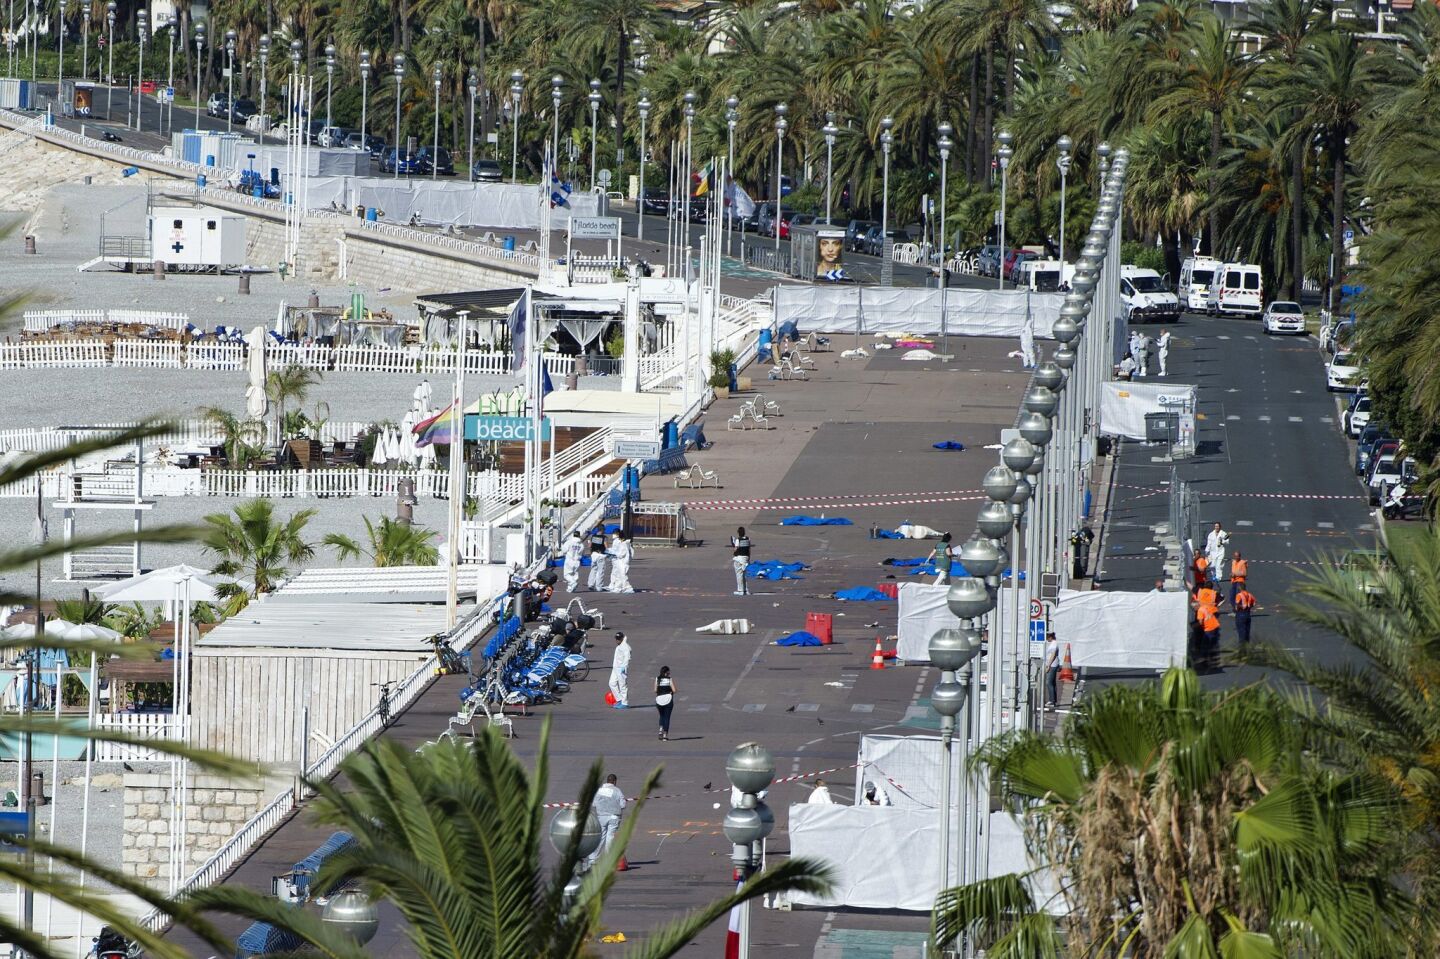 Crime scene investigators work on the Promenade des Anglais after the truck crashed into the crowd during the Bastille Day celebrations in Nice, France.